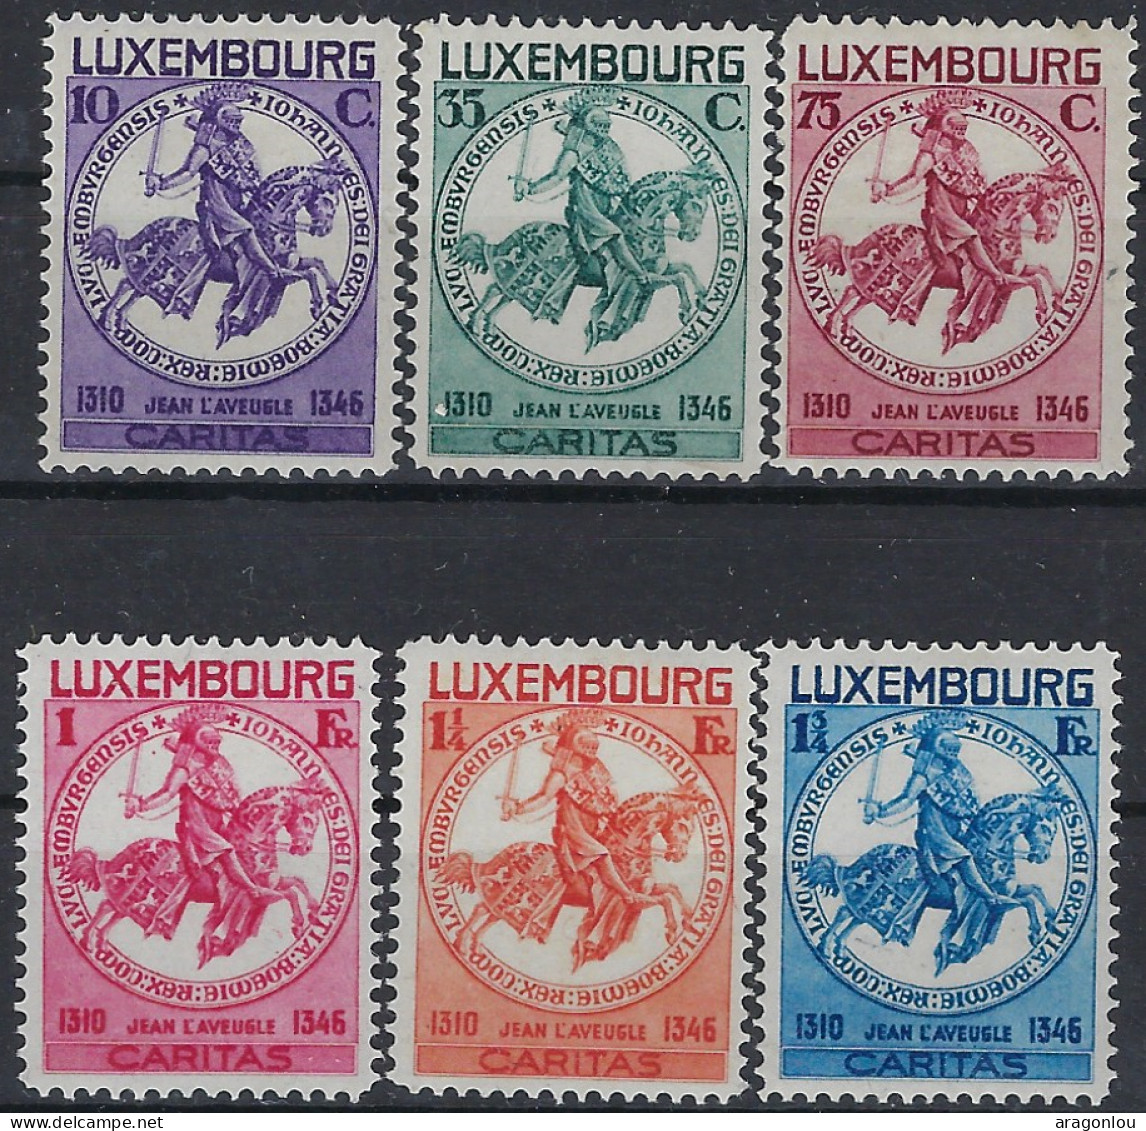 Luxembourg - Luxemburg - Timbres  1934   Jean L'Aveugle    * - Blocs & Feuillets